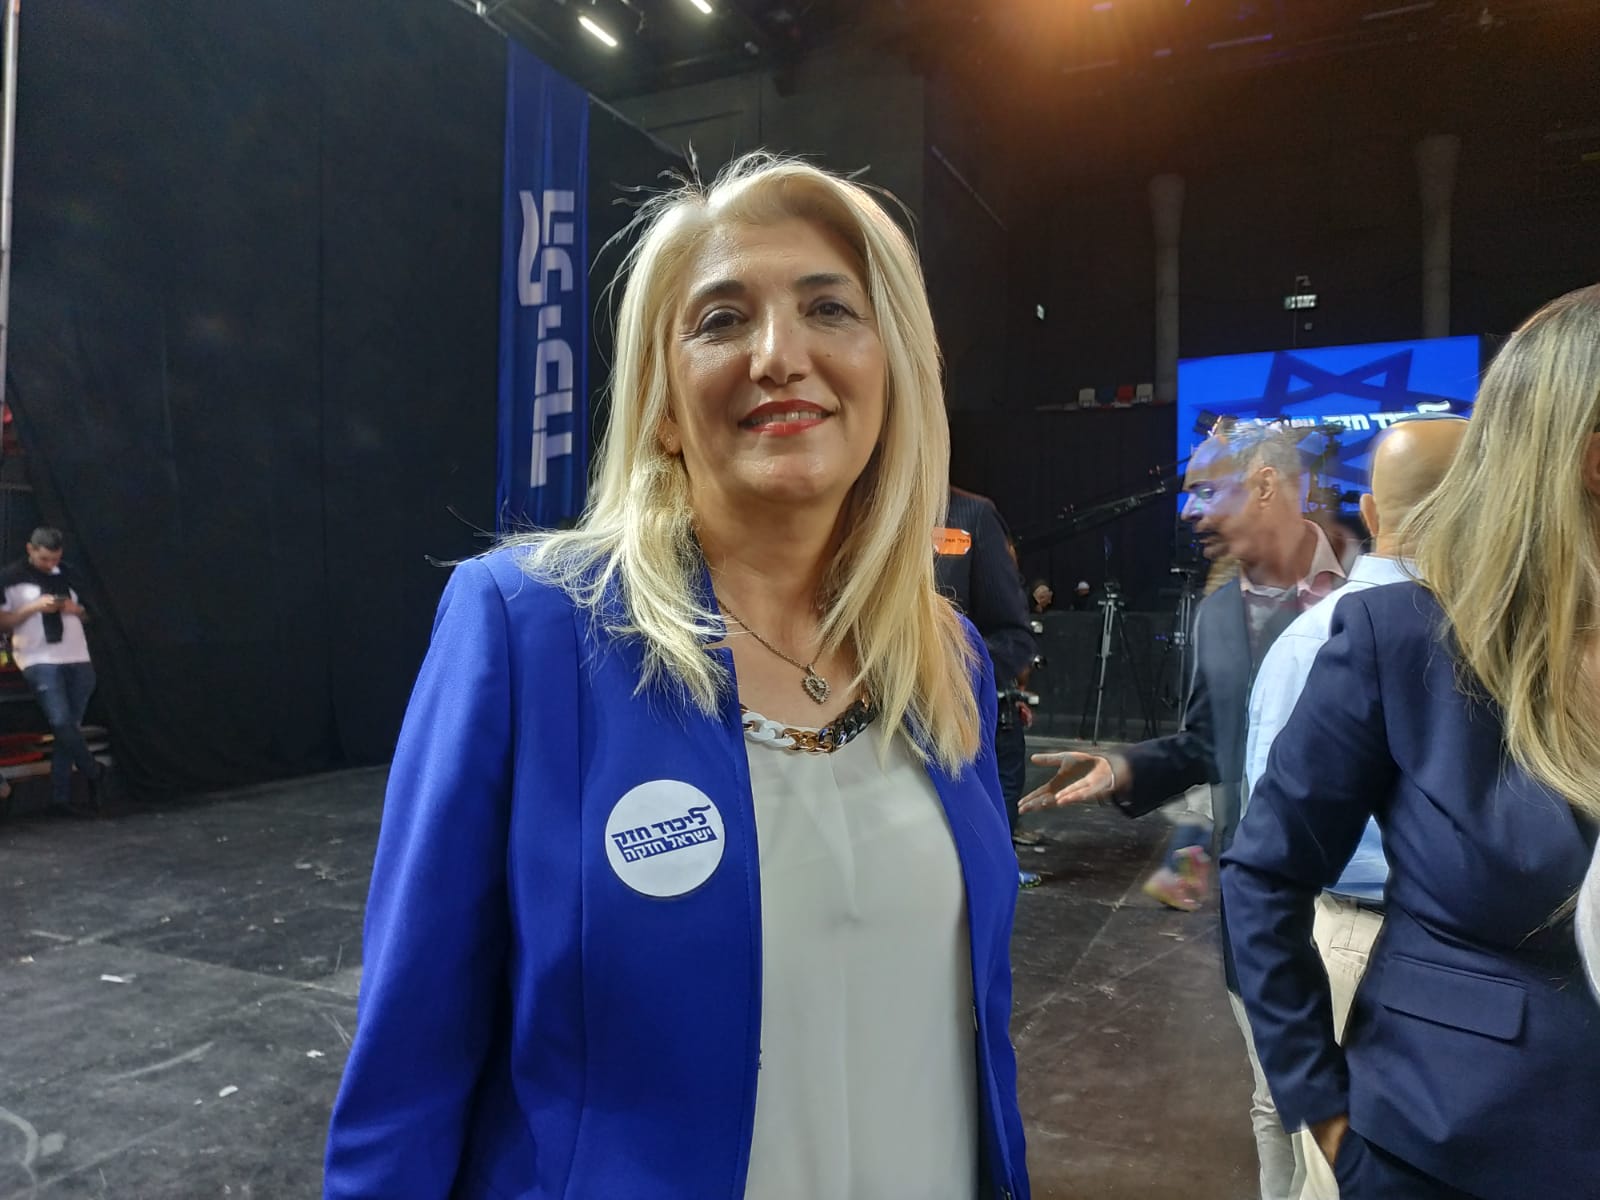 Likud candidate Osnat Mark at her party's HQ in Tel Aviv (MEE)